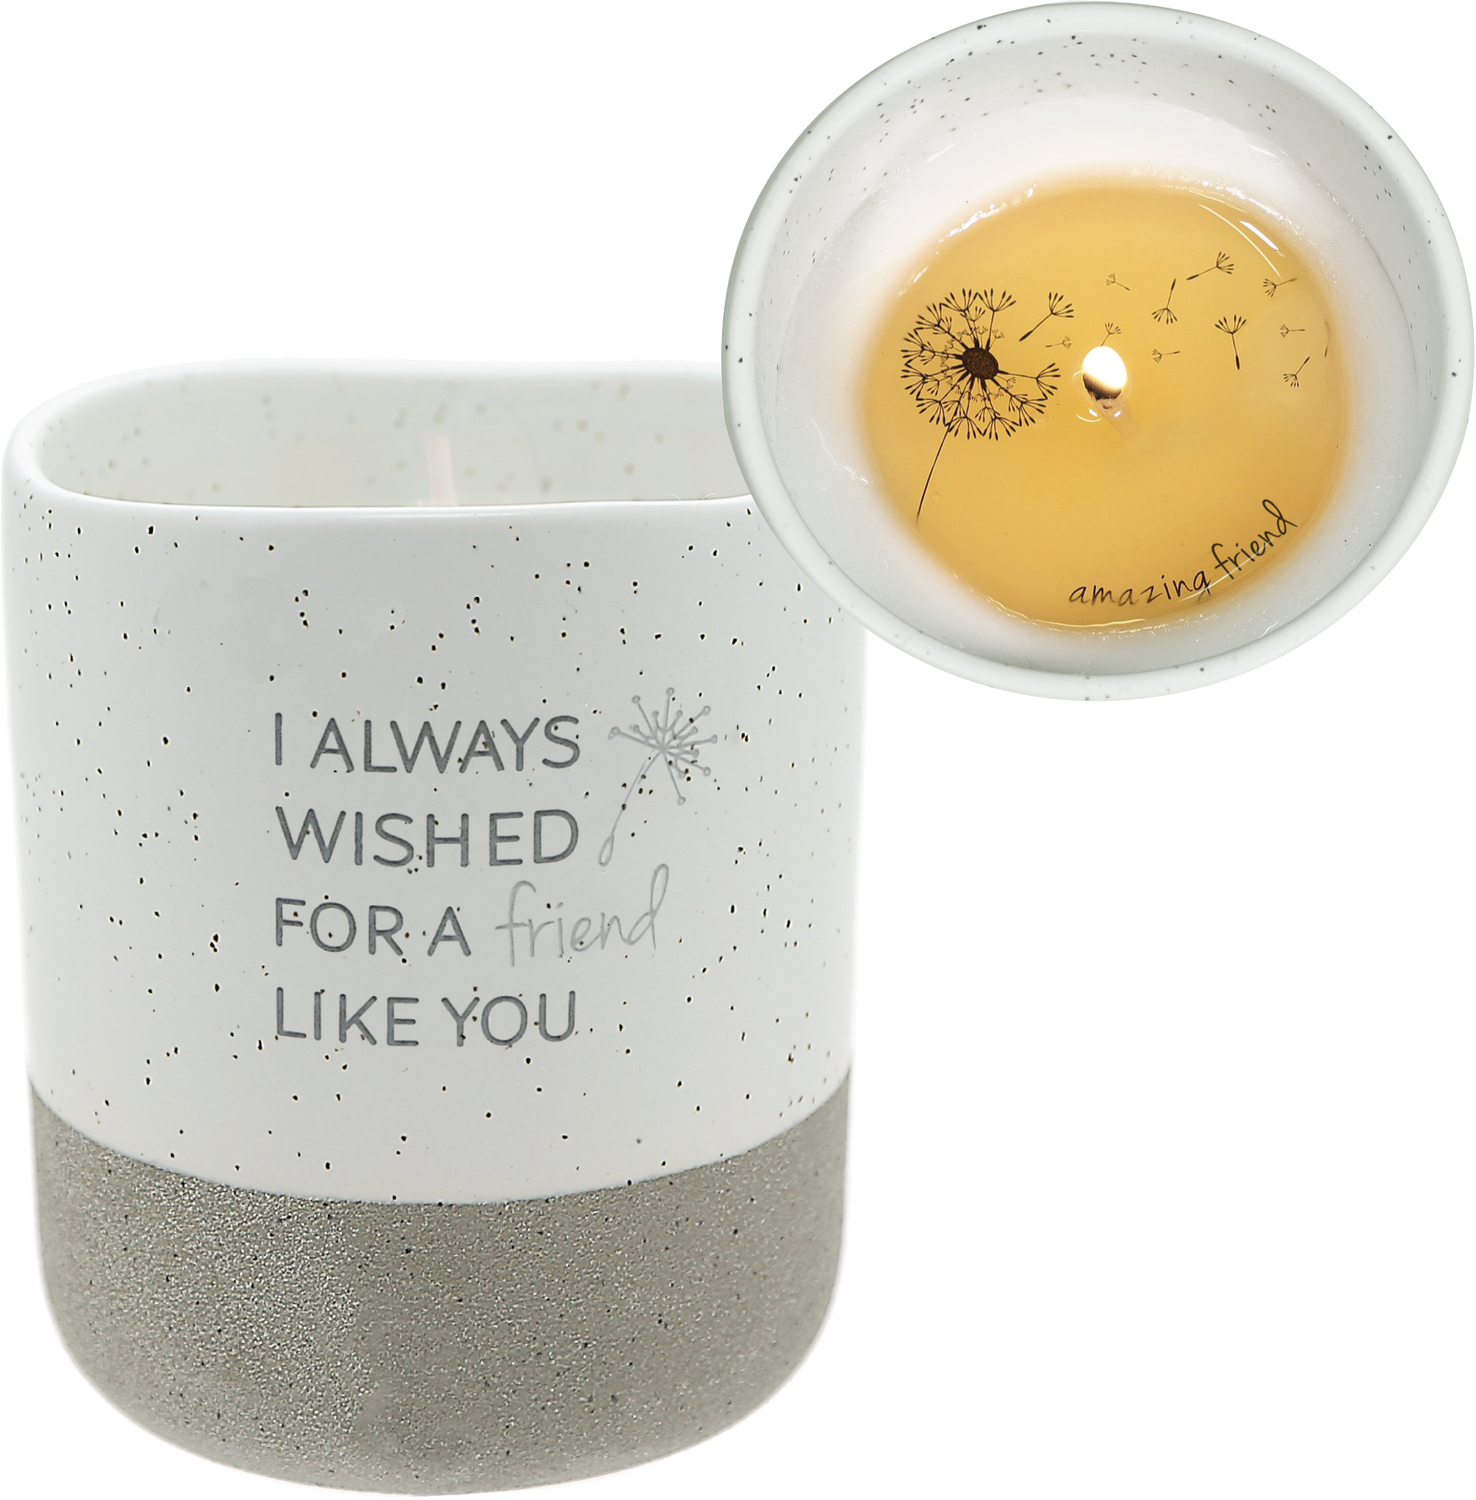 Friend Like You by I Always Wished - Friend Like You - 10 oz - 100% Soy Wax Reveal Candle
Scent: Tranquility